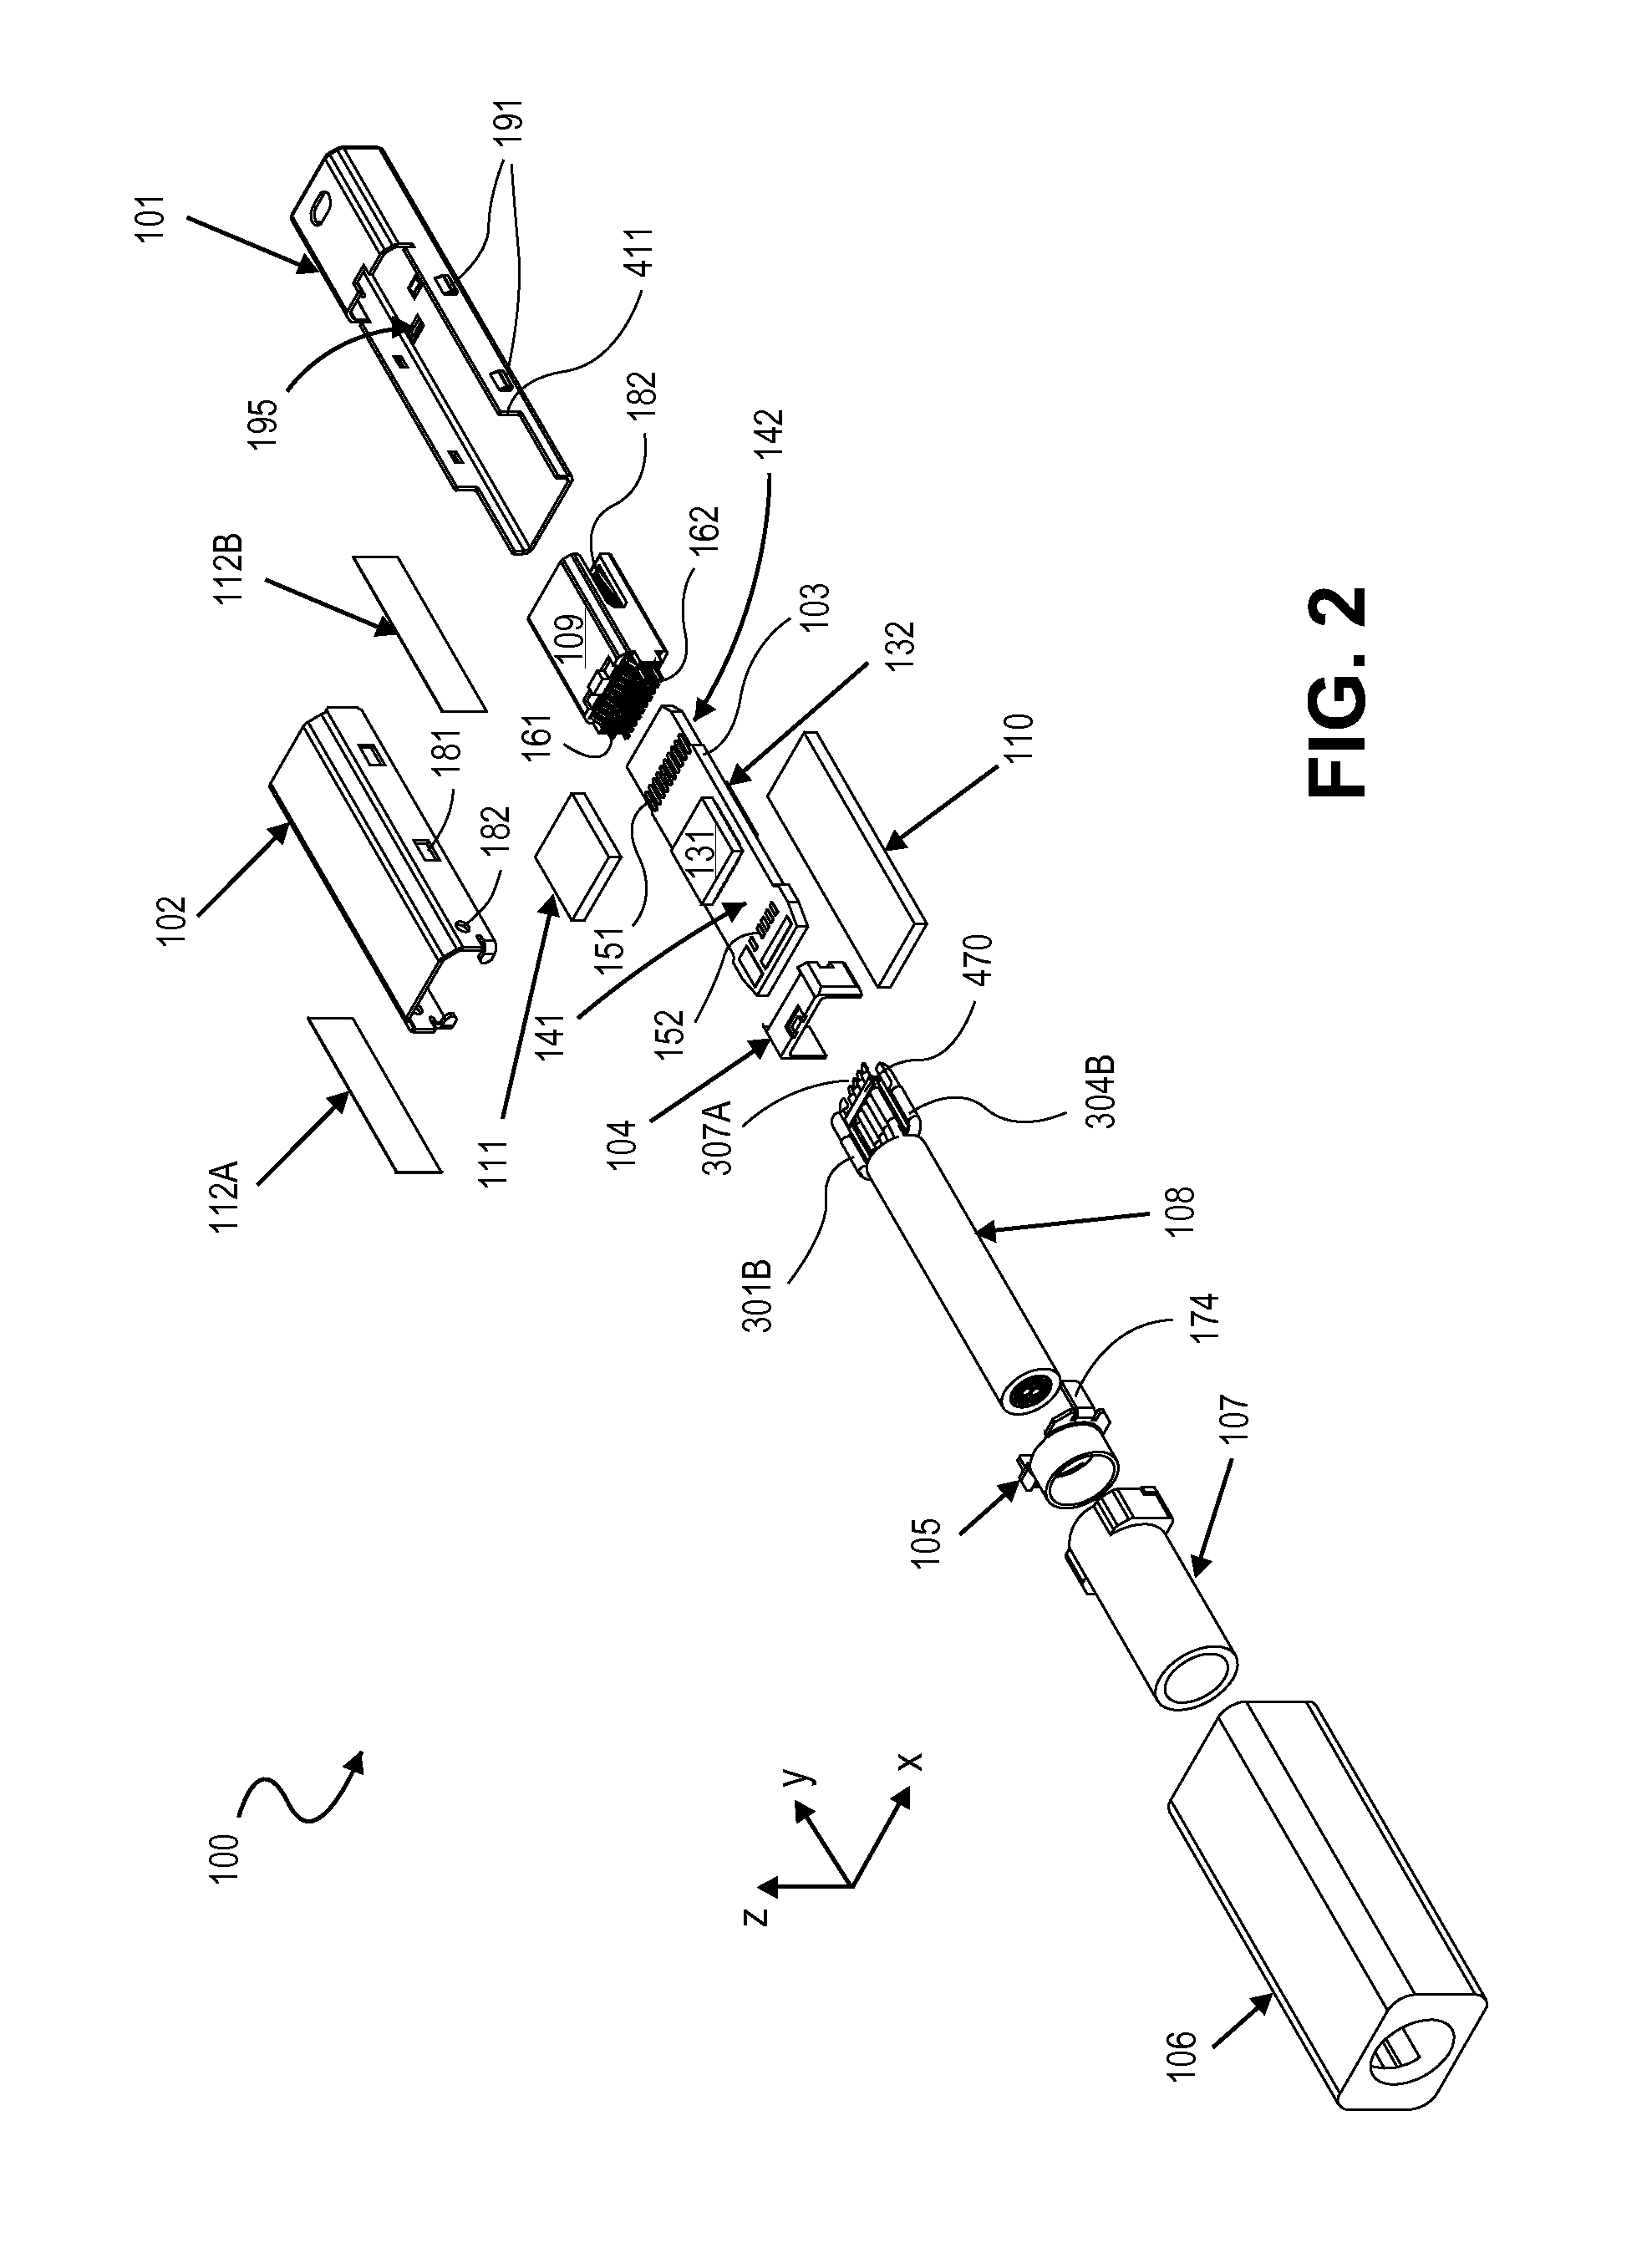 Active electrical communication cable assembly